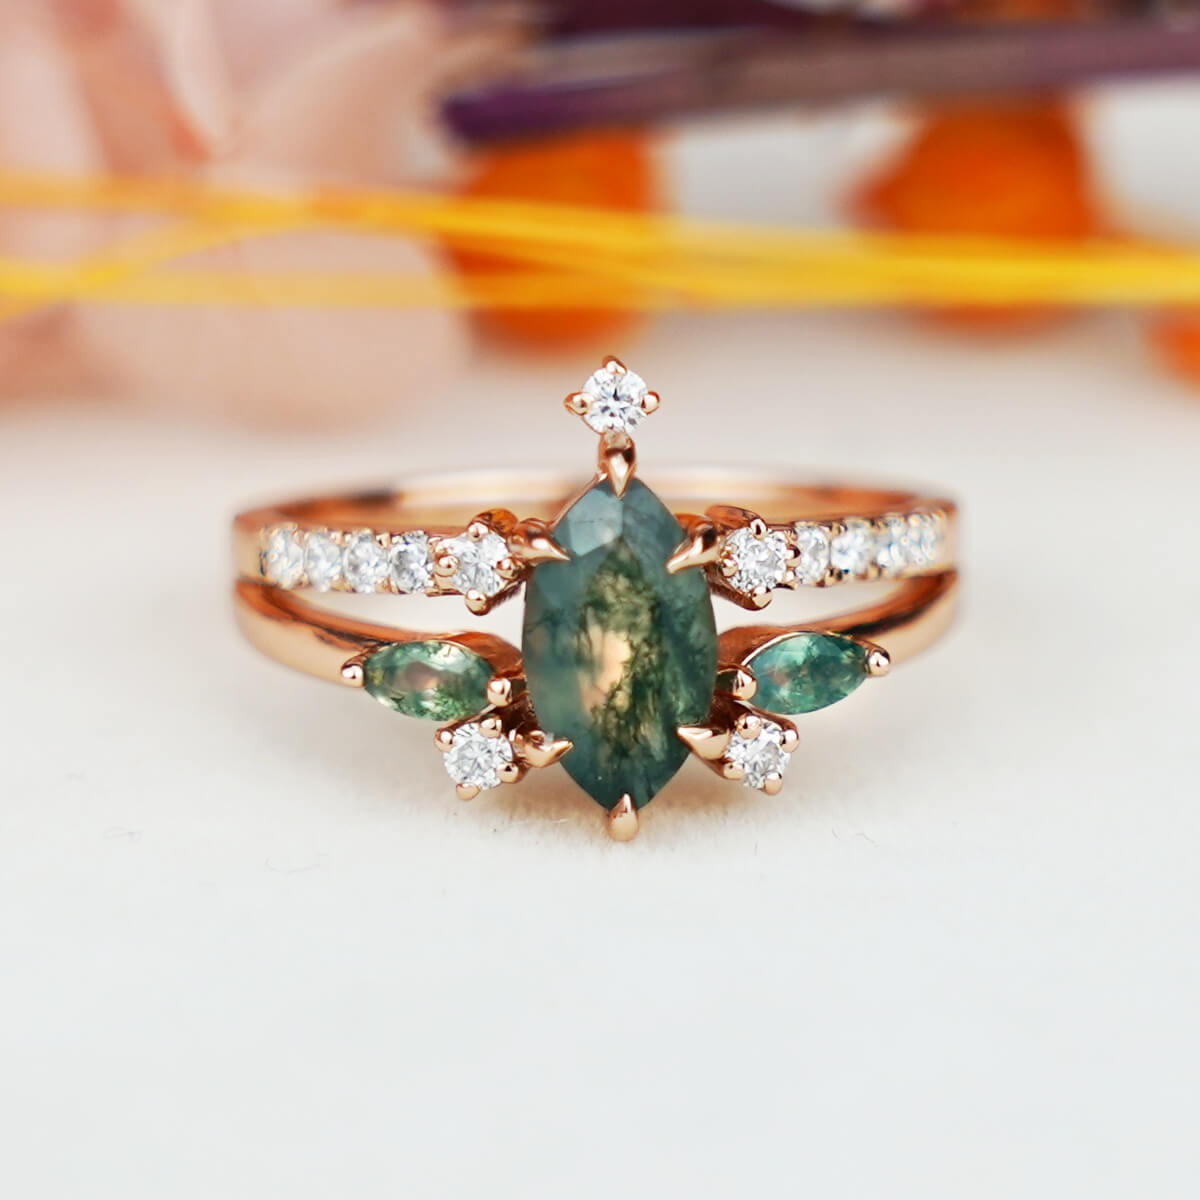 Unique Marquise Shaped Moss Agate Engagement Ring, High-end Jewelry Handmade Custome Ring 18k Solid Gold Ring, Anniversary Gift for Her